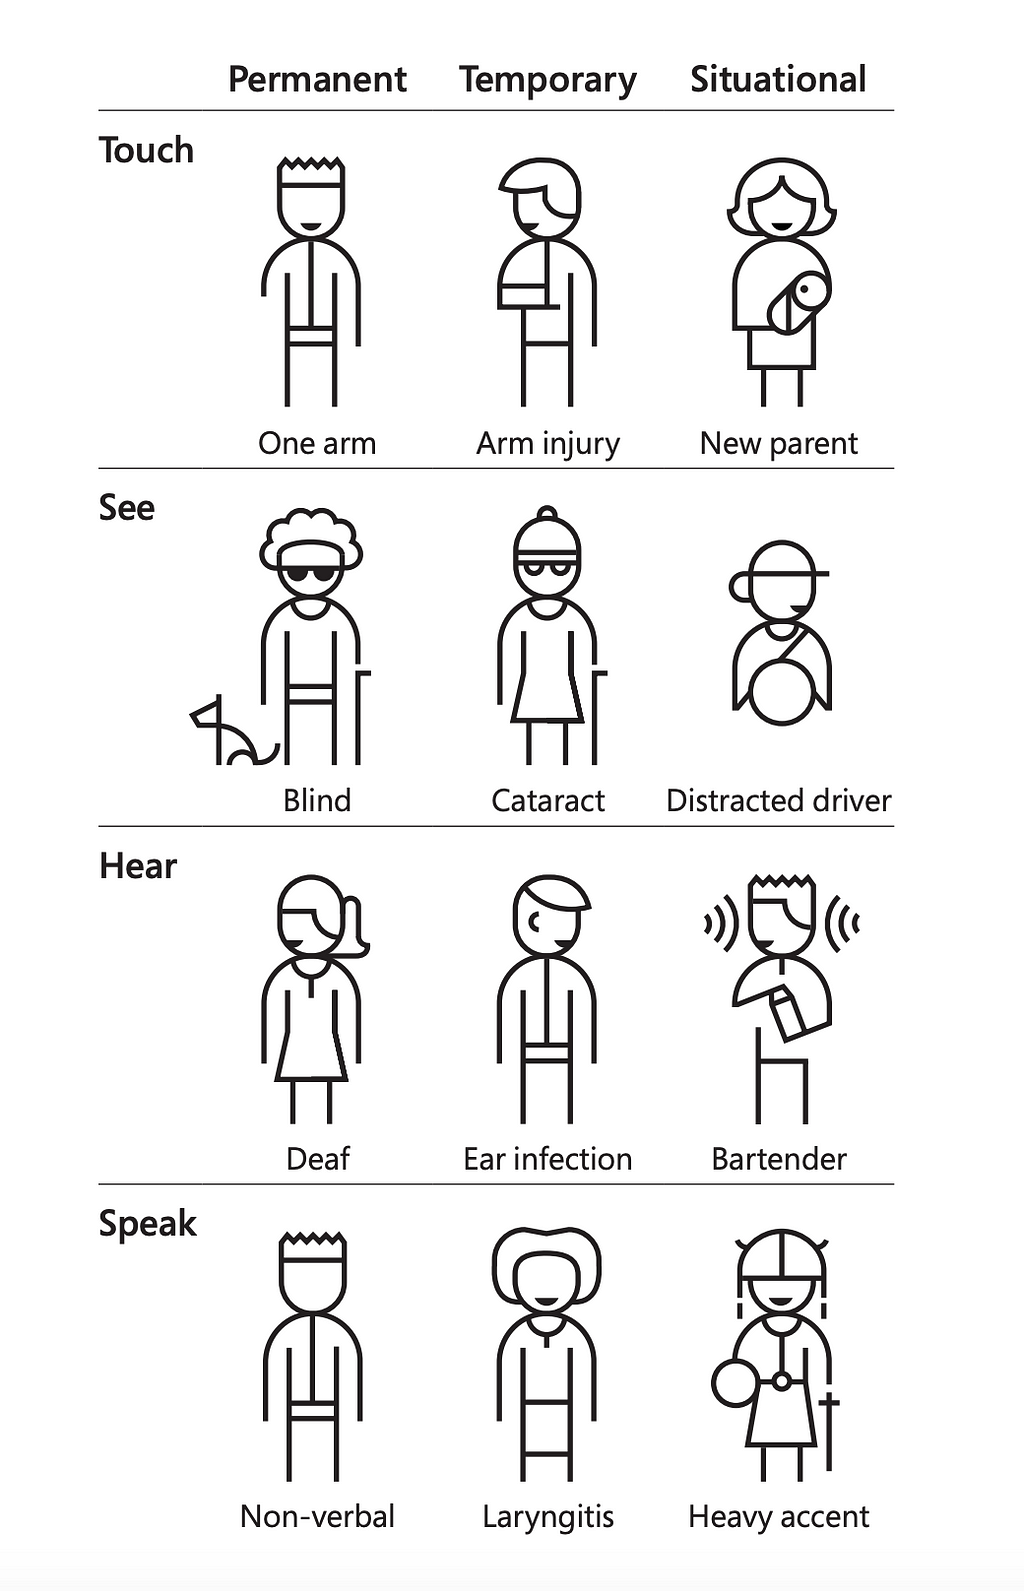 An illustration done by Microsoft Inclusive Design showing different levels of exclusion: Permanent, Temporary and Situational impairments.